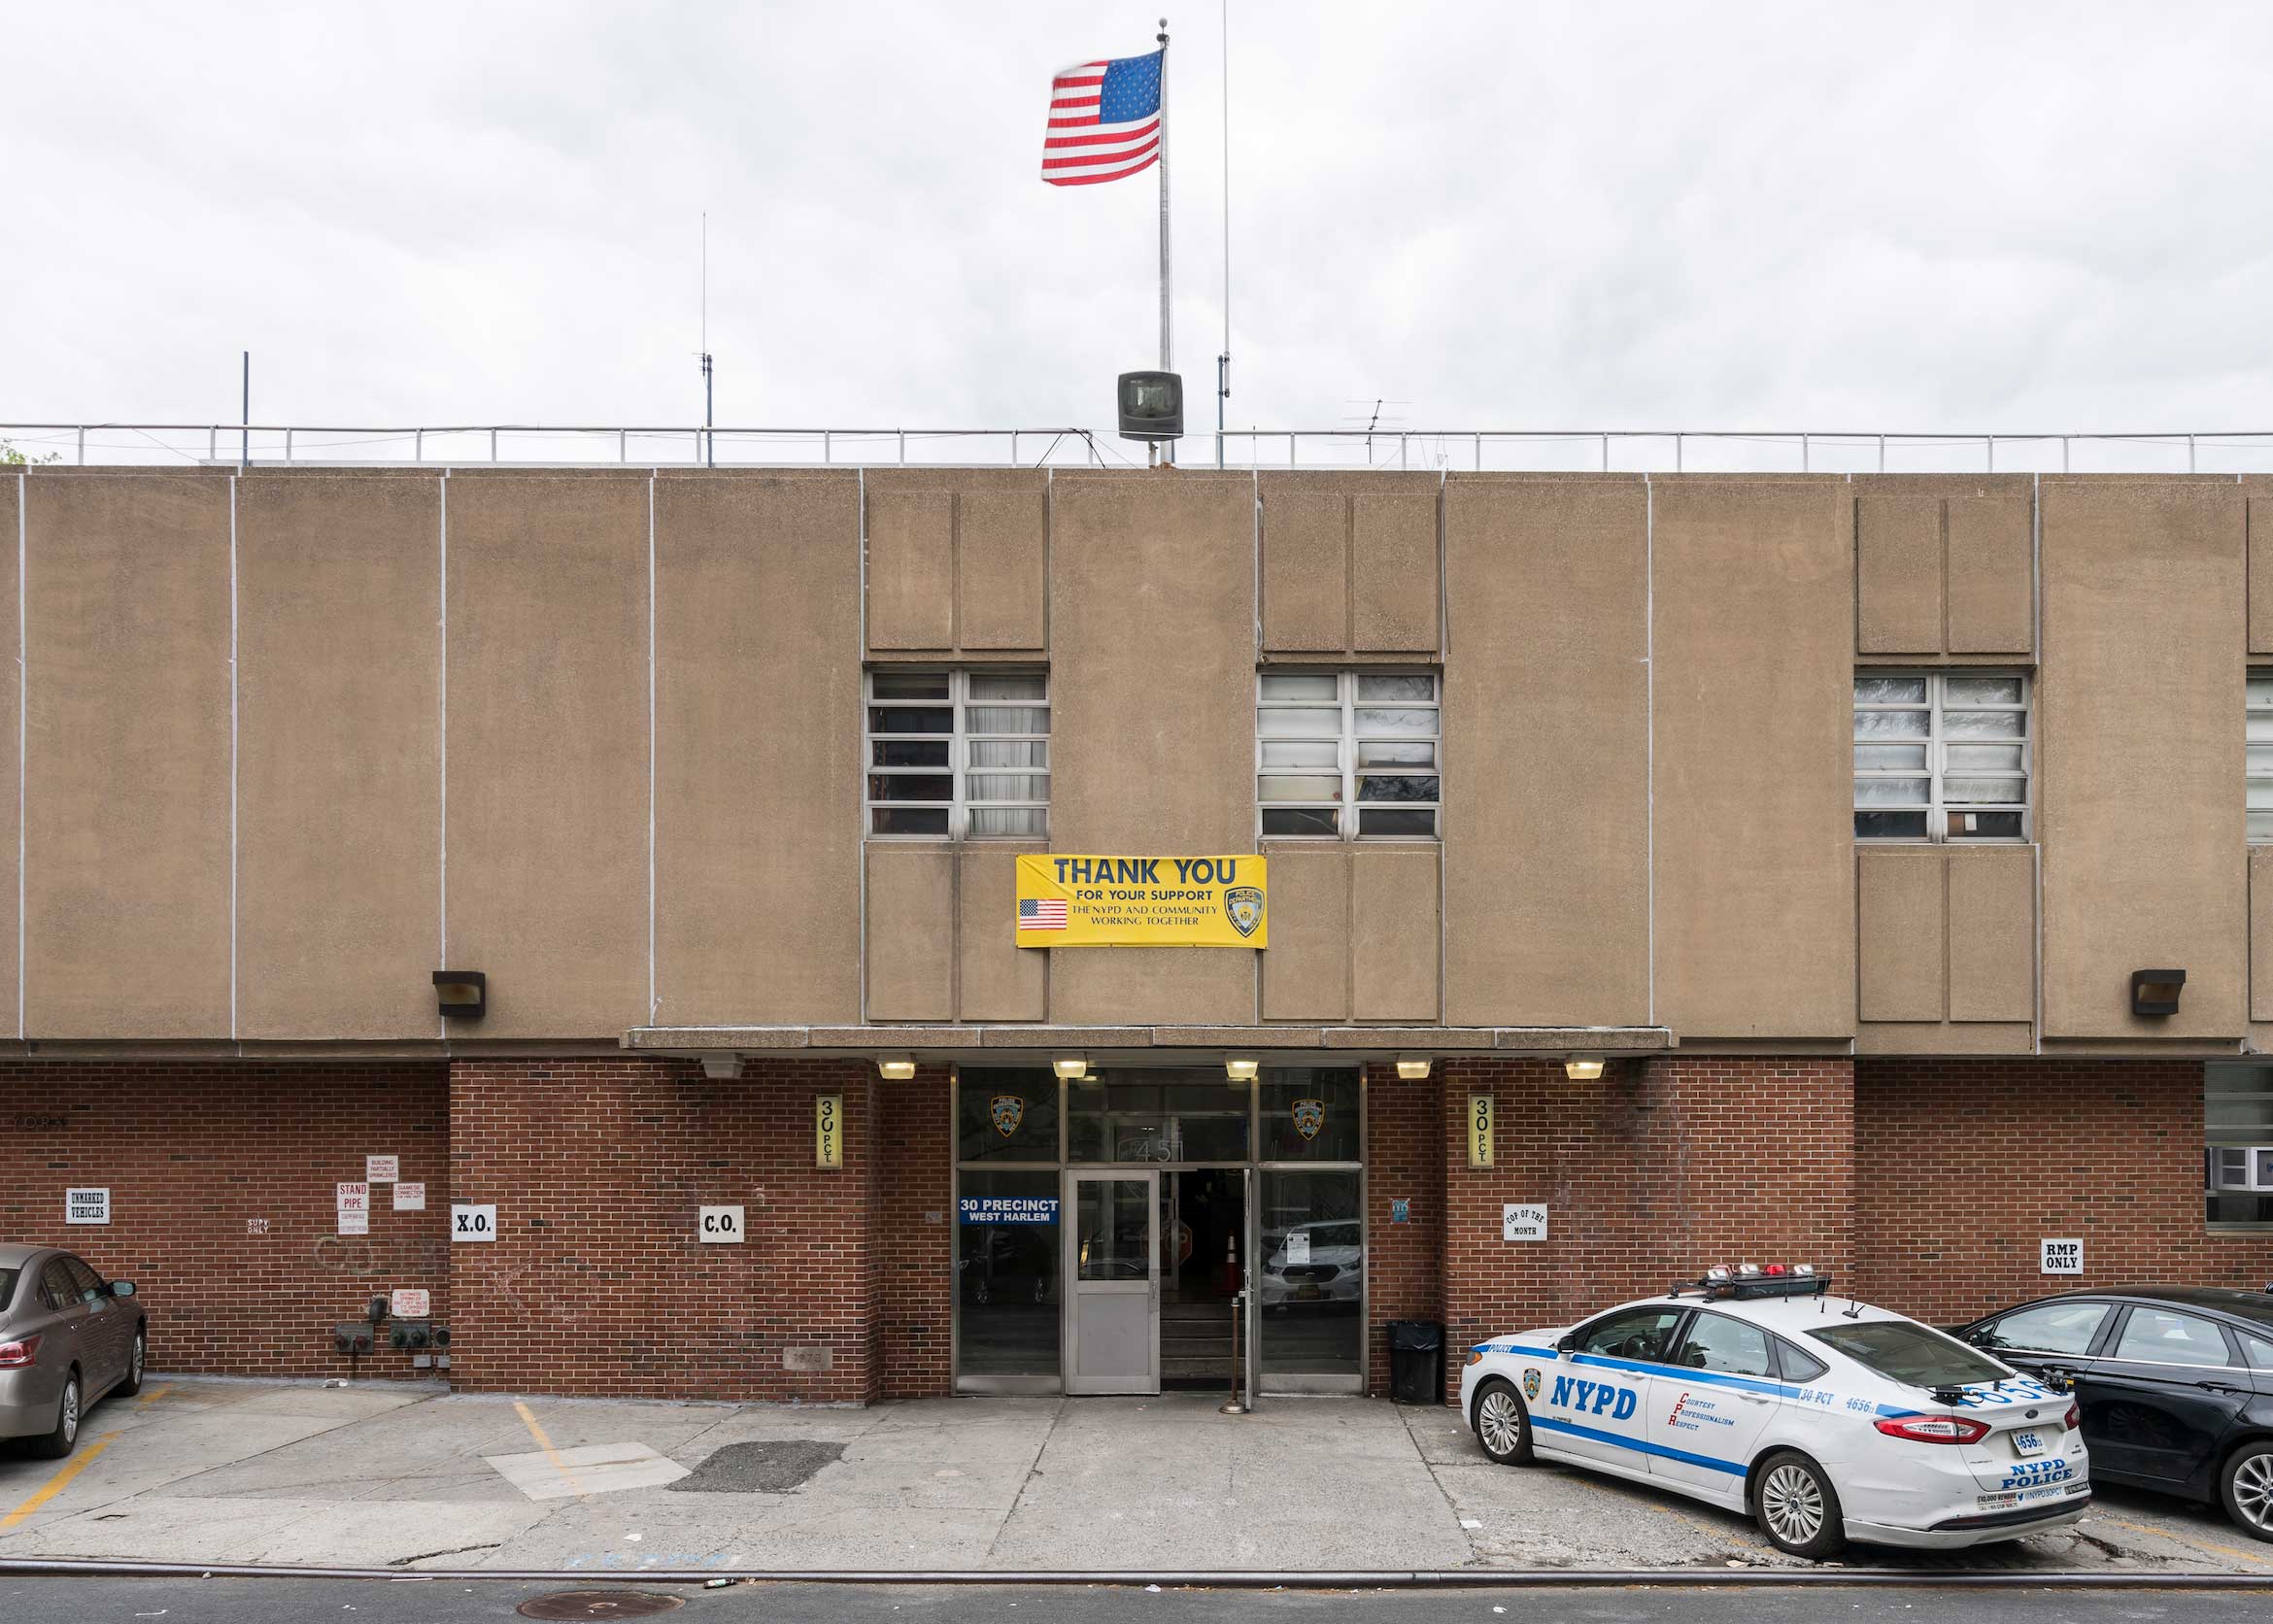 The 30th Precinct of the New York Police Department